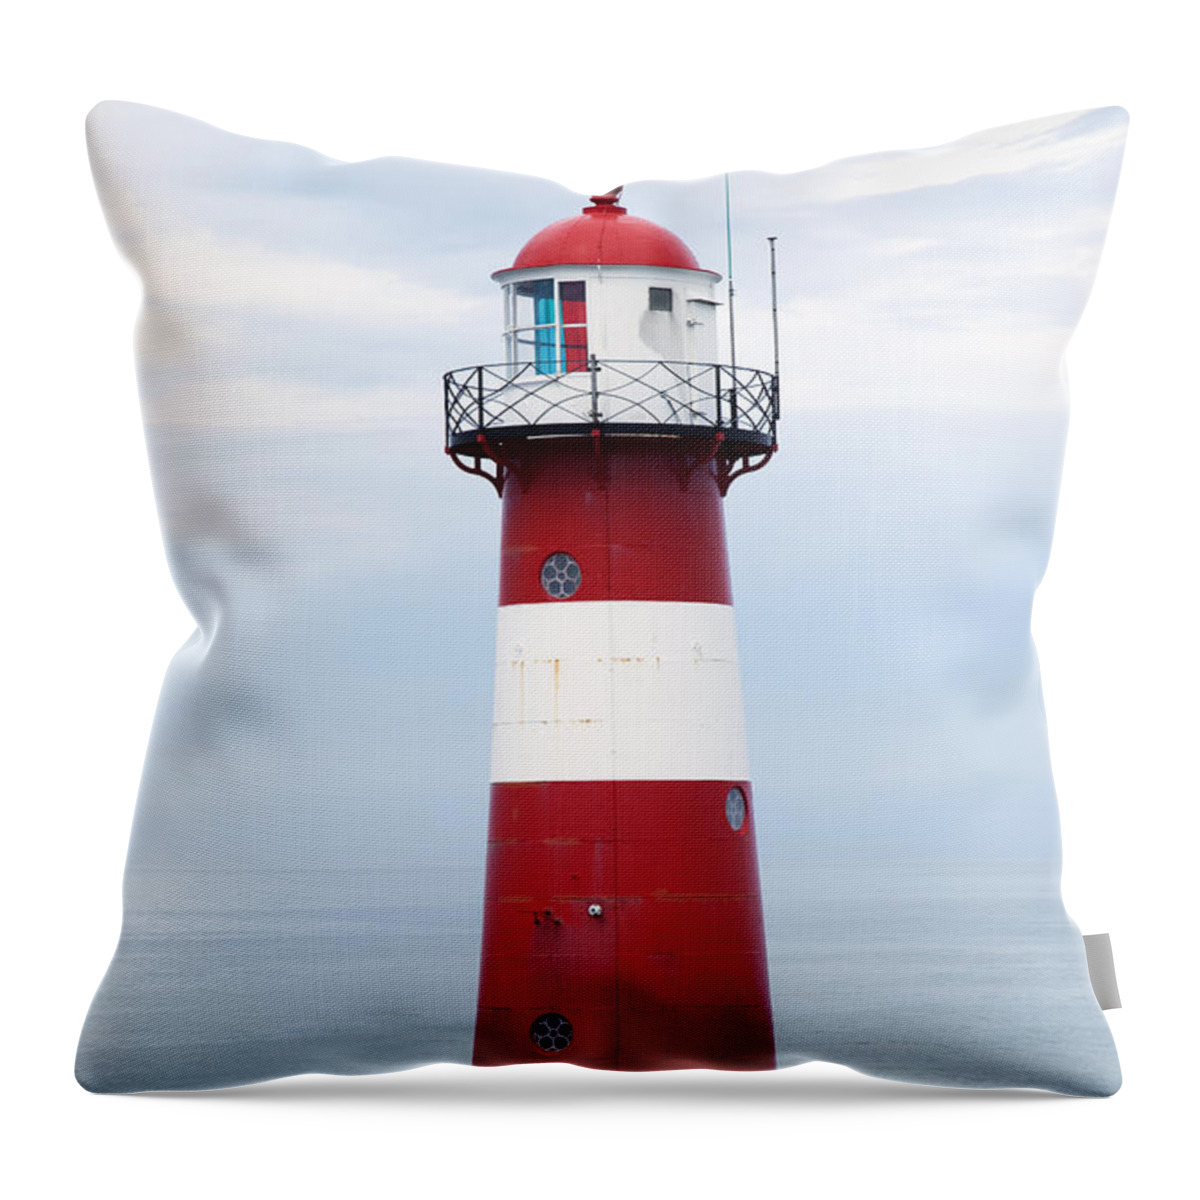 Cloud Throw Pillow featuring the photograph Red And White Lighthouse by Peter Zoeller